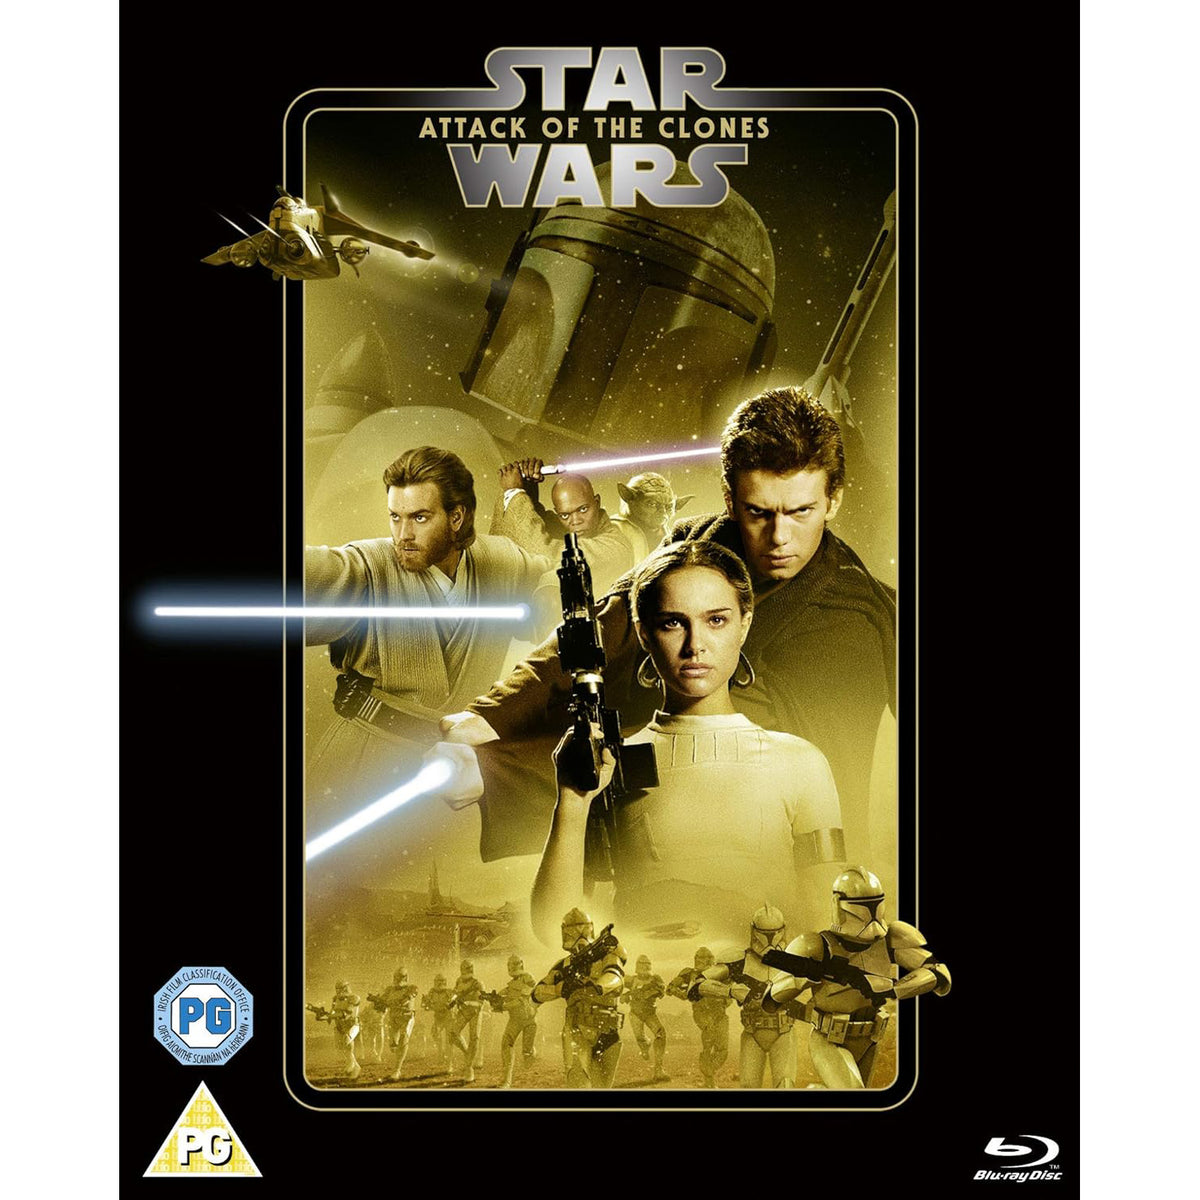 Attack　Clones　Episode　the　Wars:　of　II　Star　Shopville　[Blu-Ray]　—